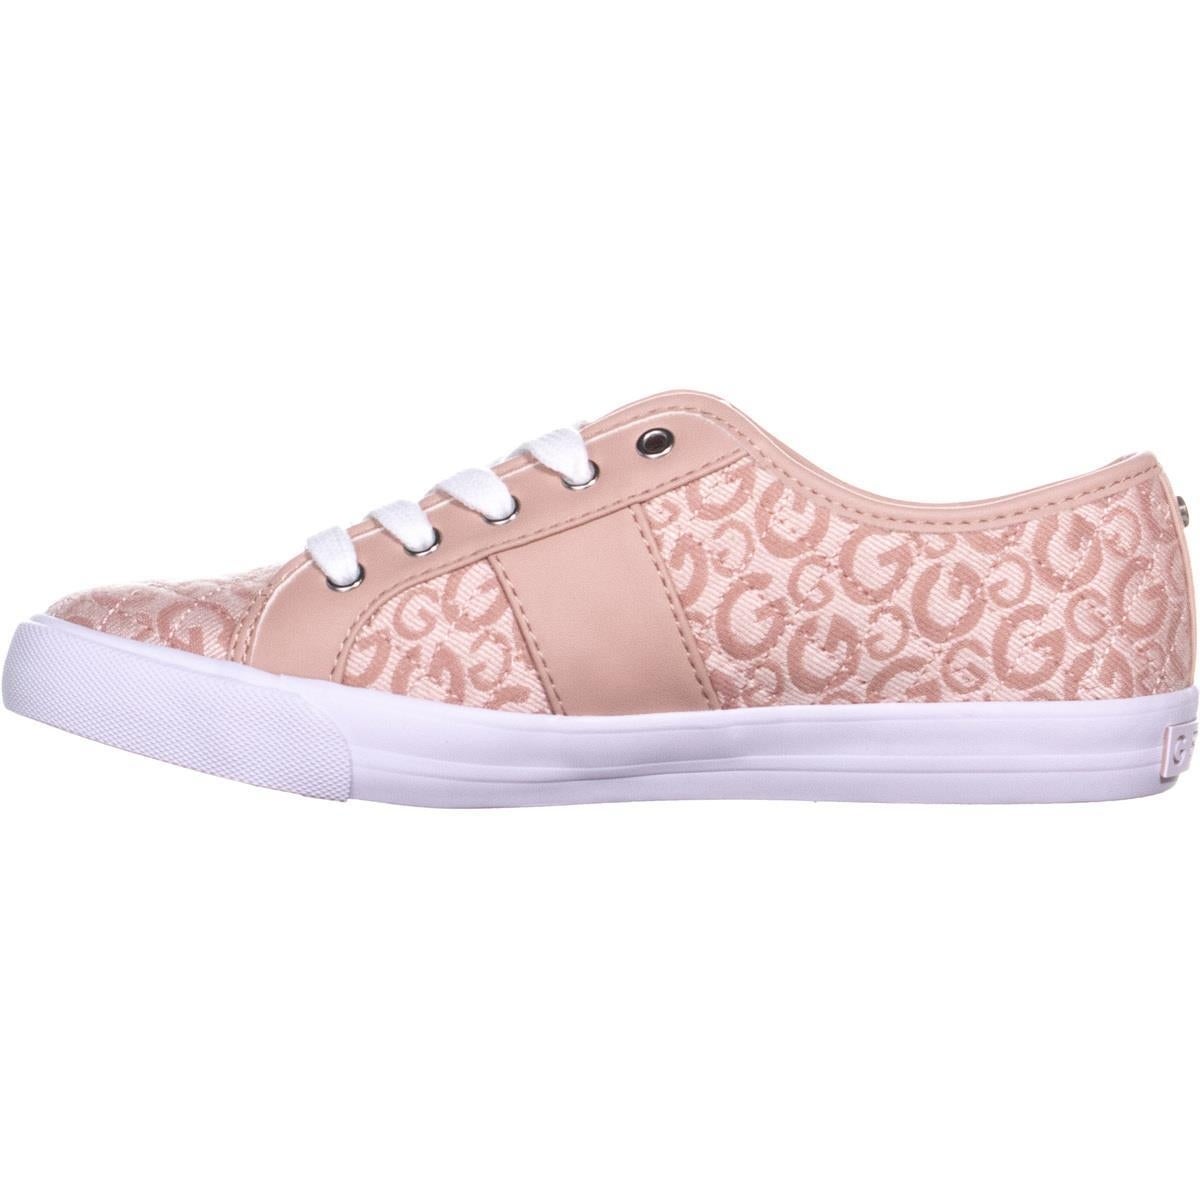 G by Guess Womens Backer3 Fabric Low Top Lace Up Fashion, Light Pink ...